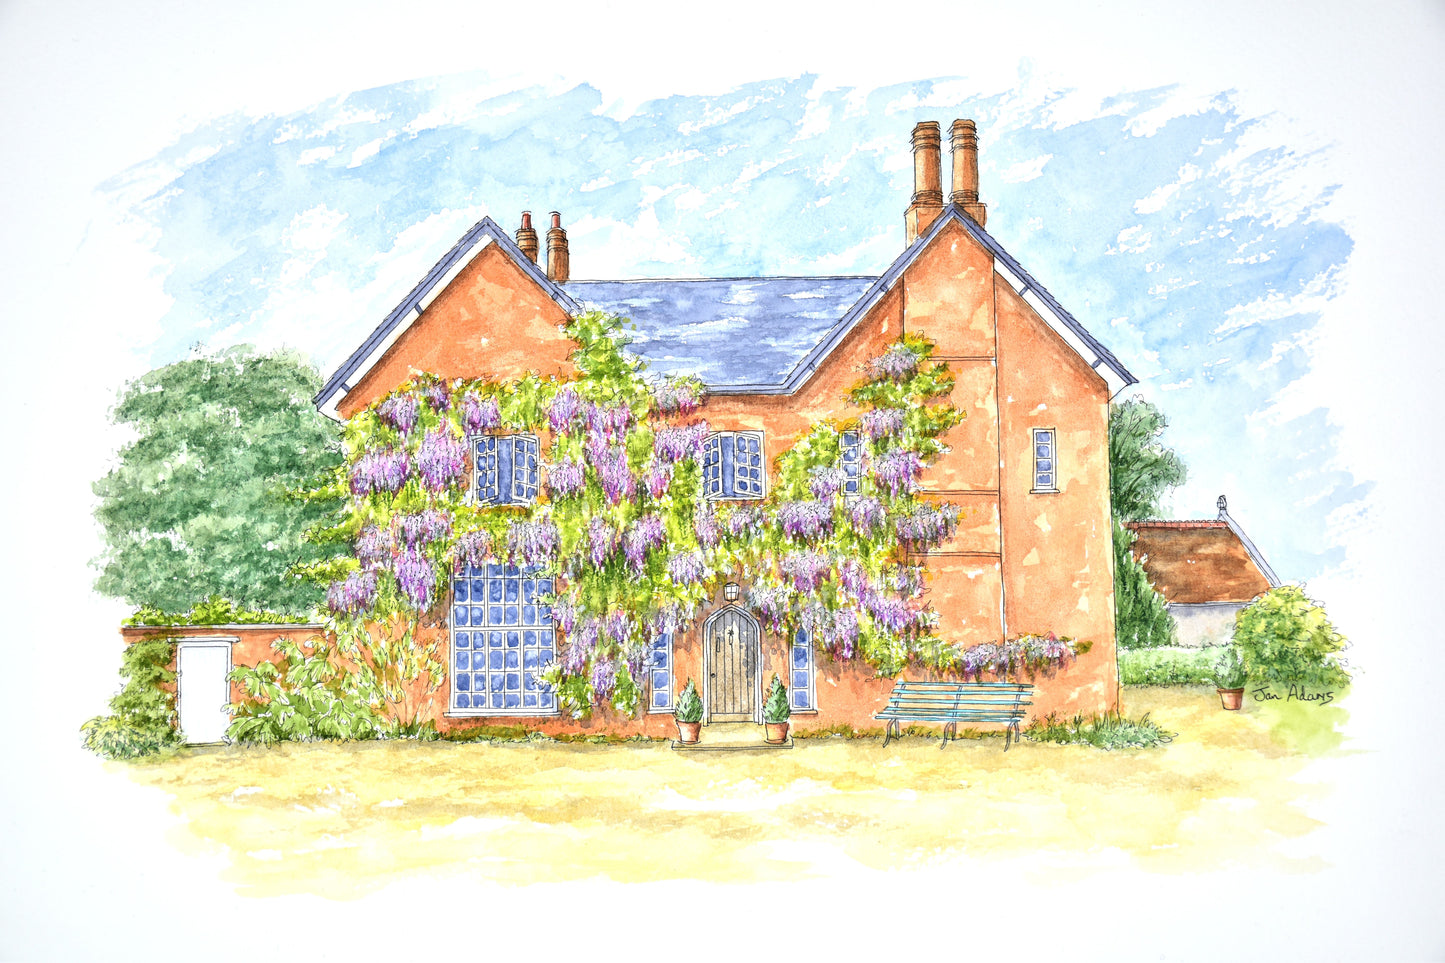 Large detached house with wisteria covering the front wall